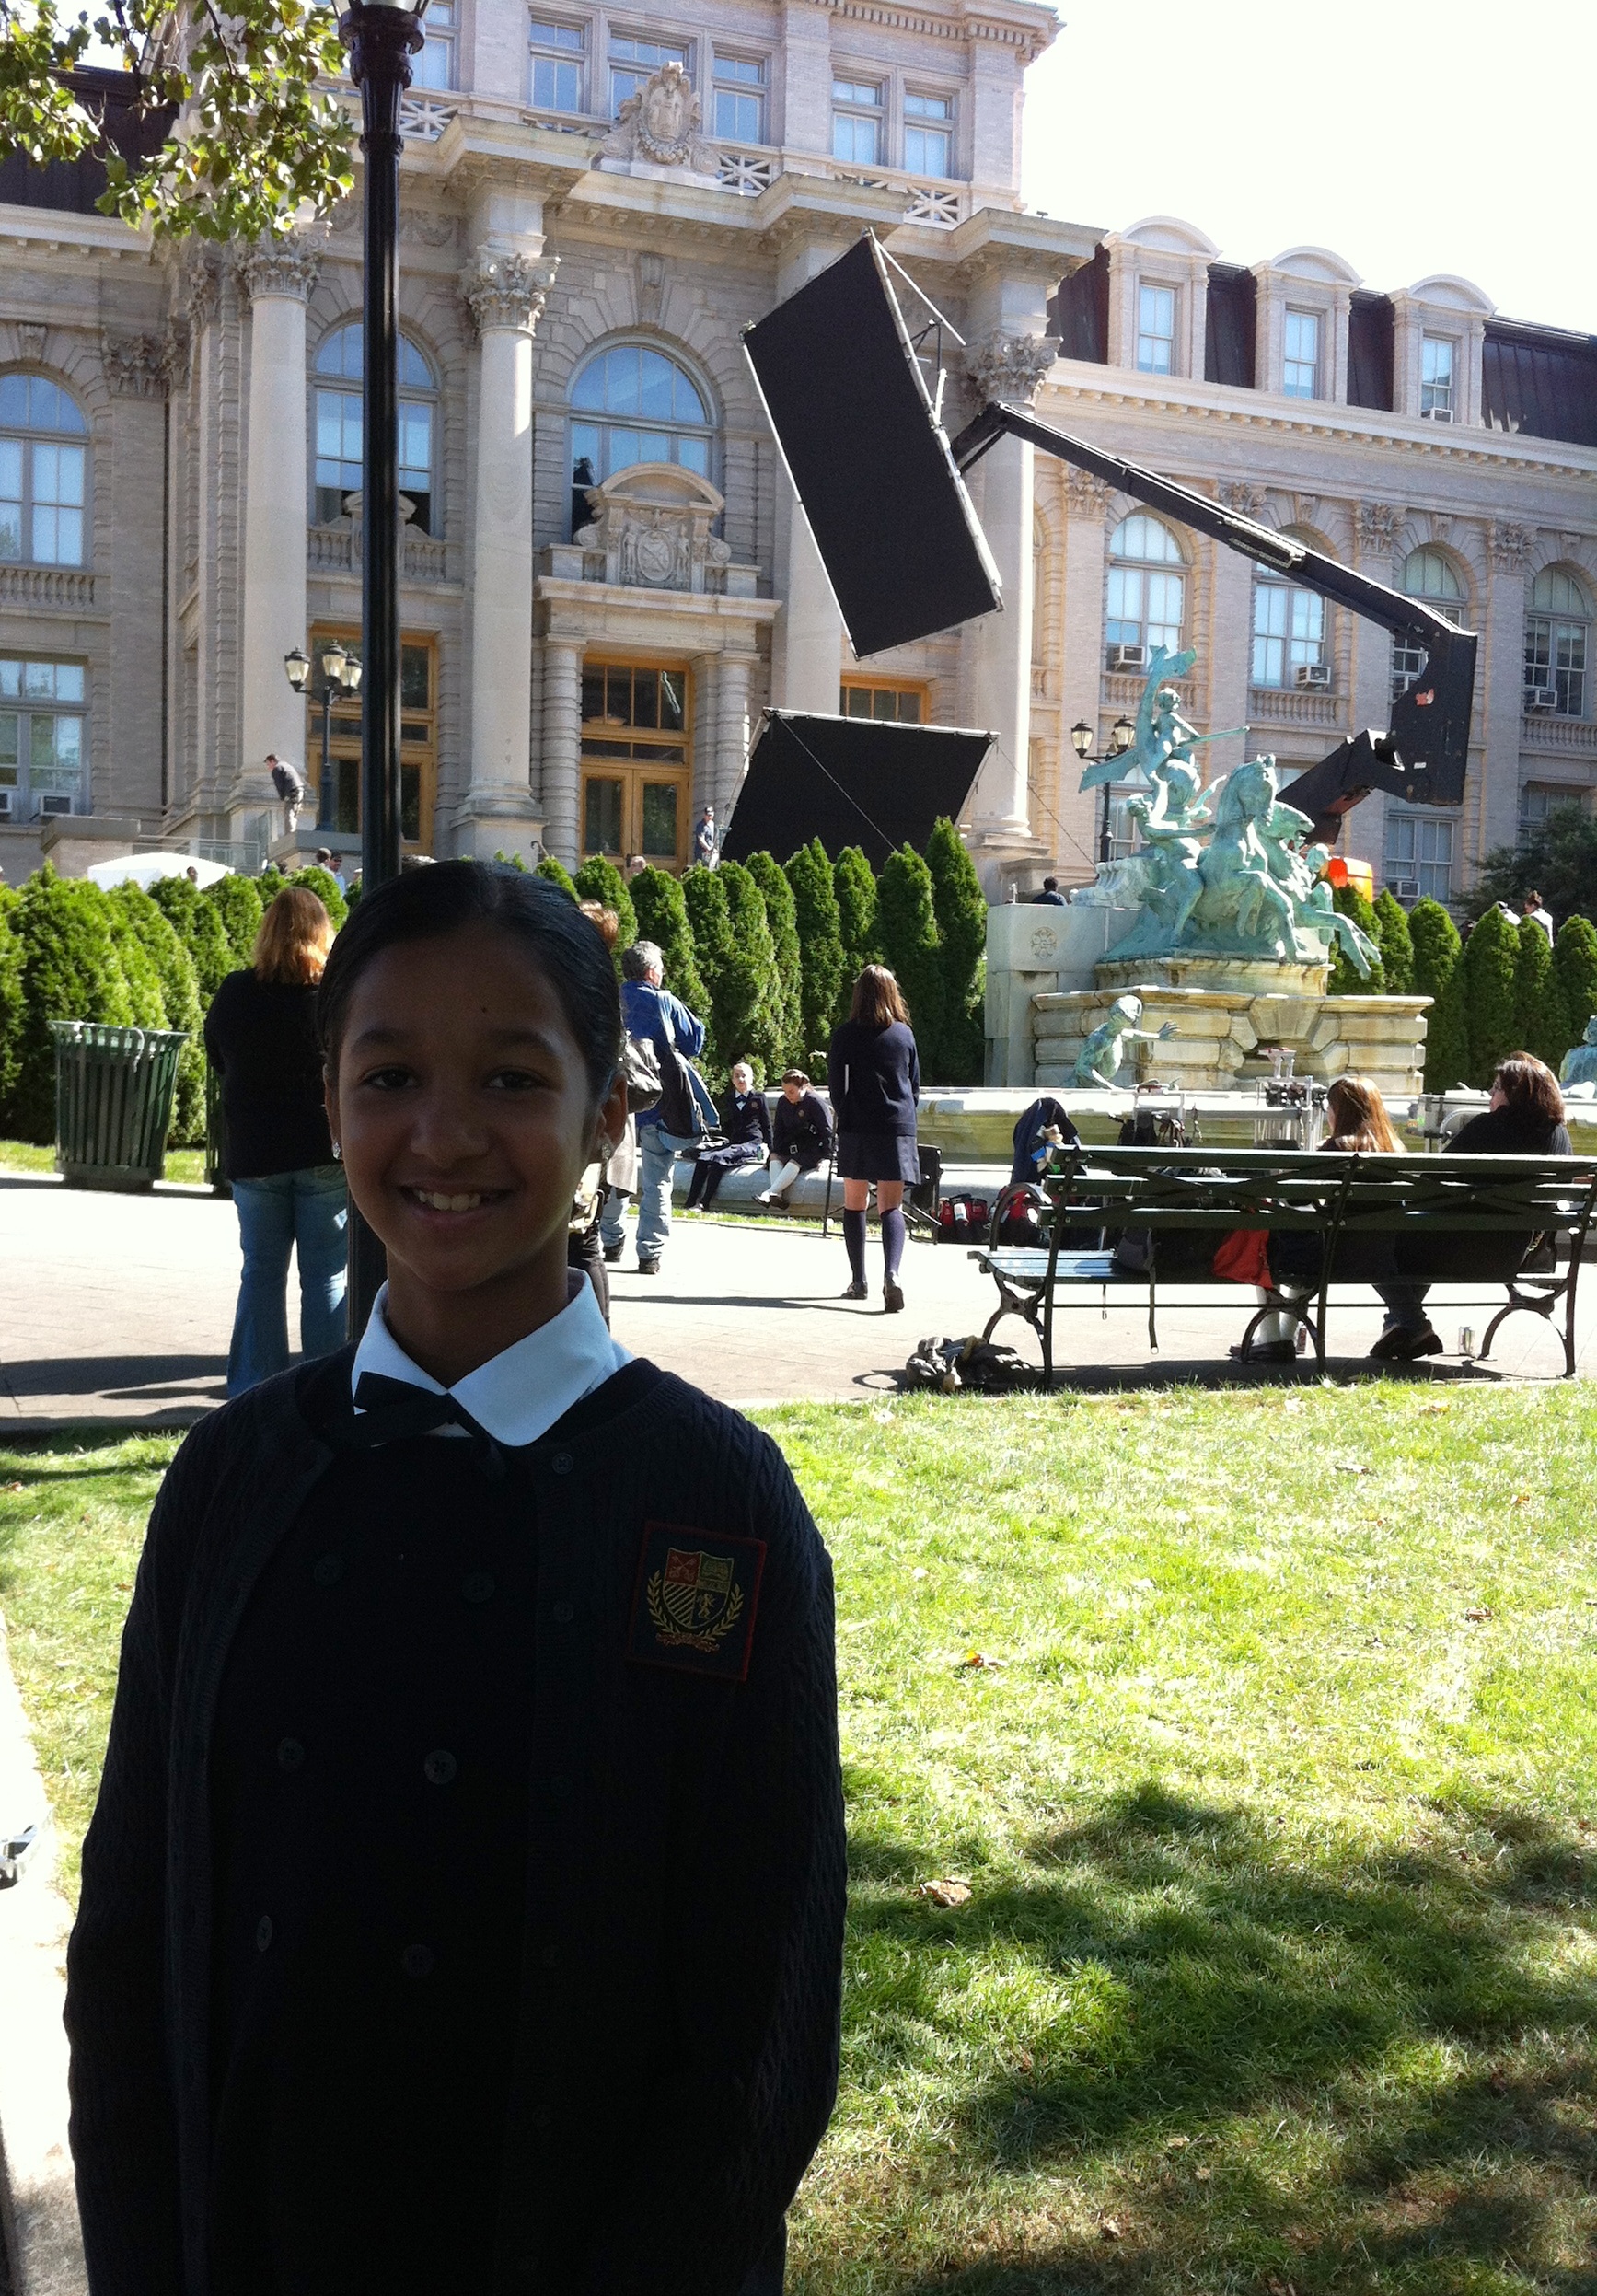 Chetna on set as a prep school student in TV show 'Gotham'.